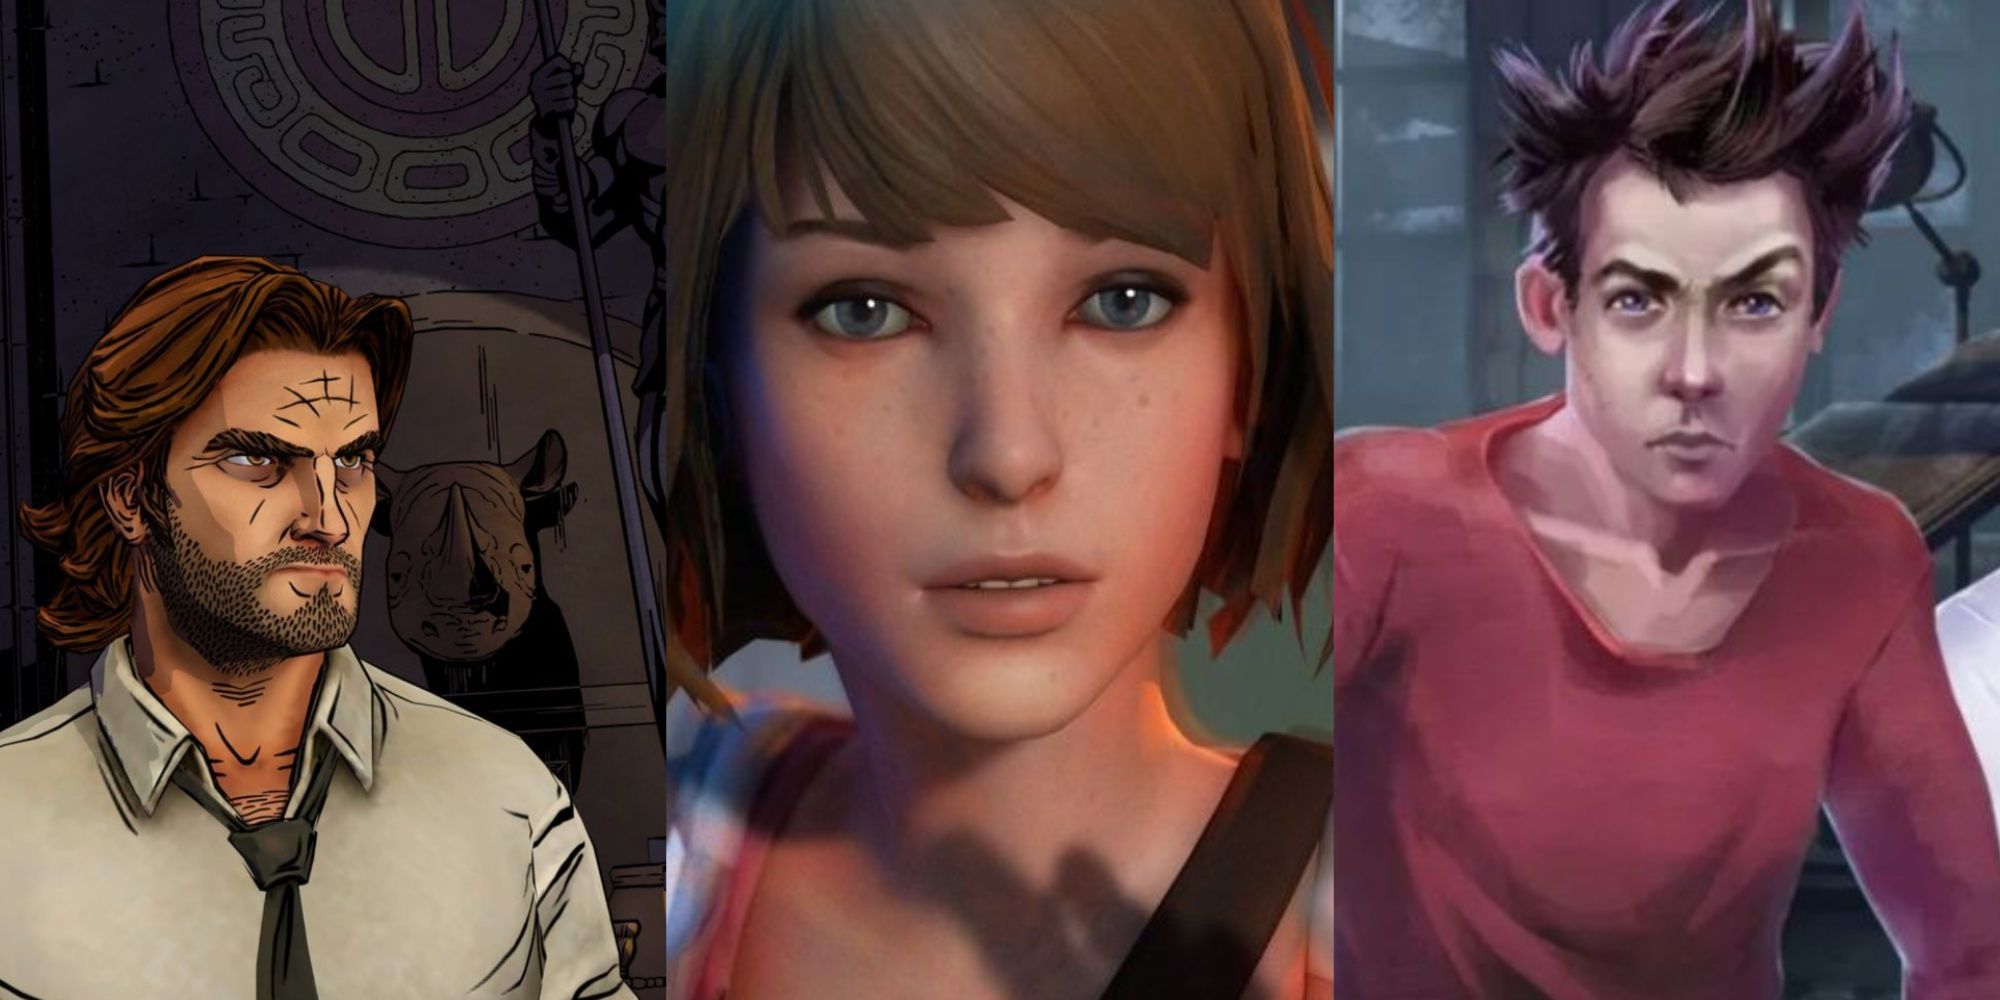 Split images of The Wolf Among Us, Life Is Strange, and Adventure Escape Asylum